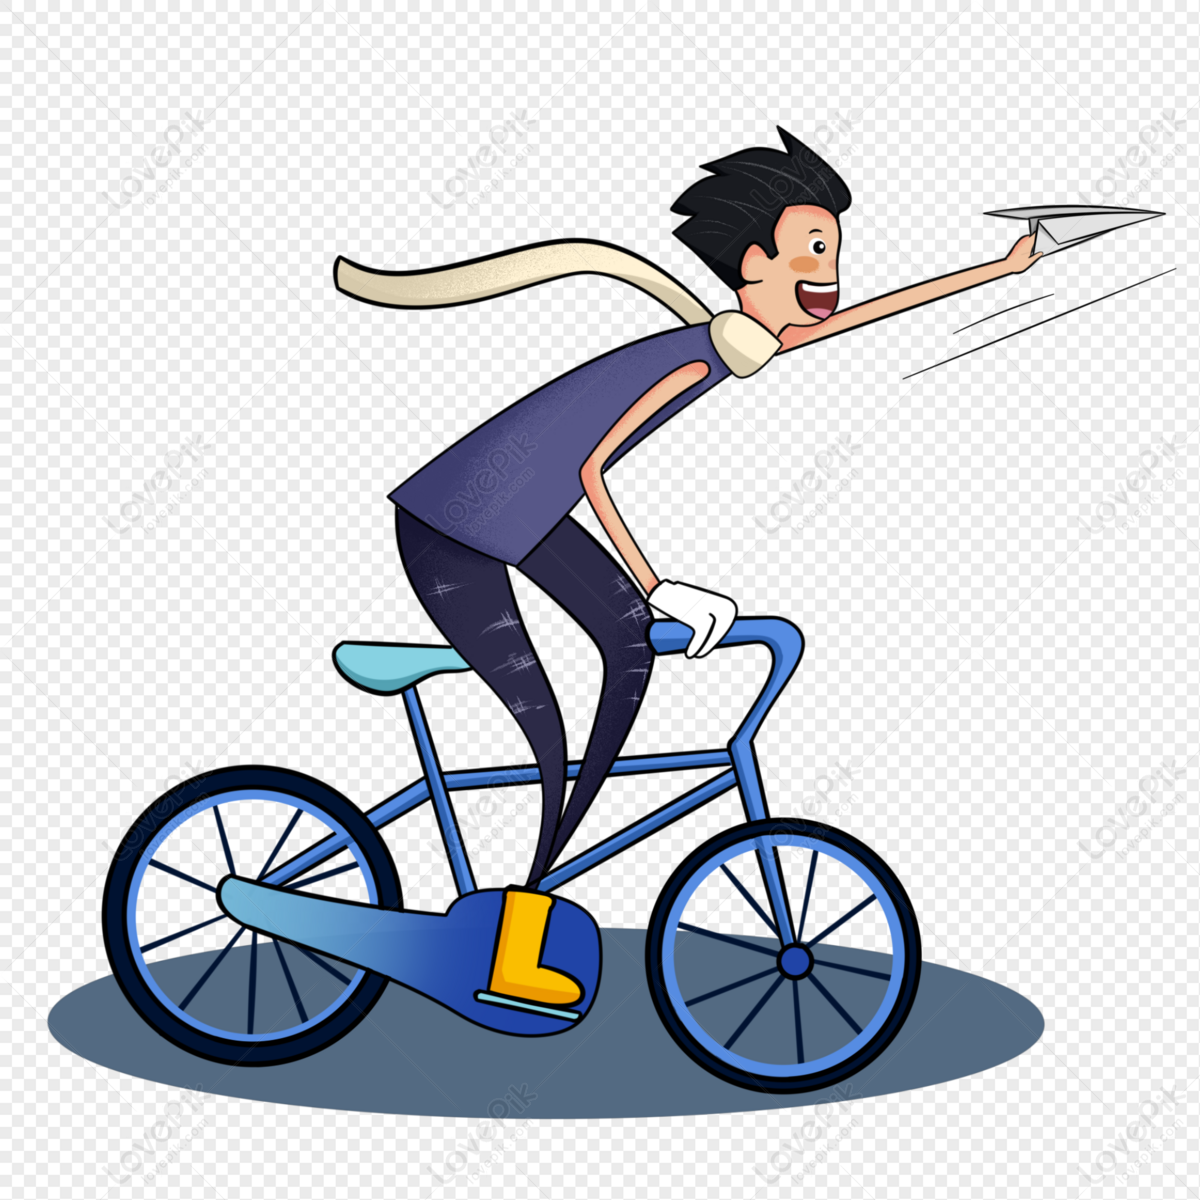 Cartoon Character Riding A Bicycle Throwing A Paper Plane PNG White  Transparent And Clipart Image For Free Download - Lovepik | 401549982